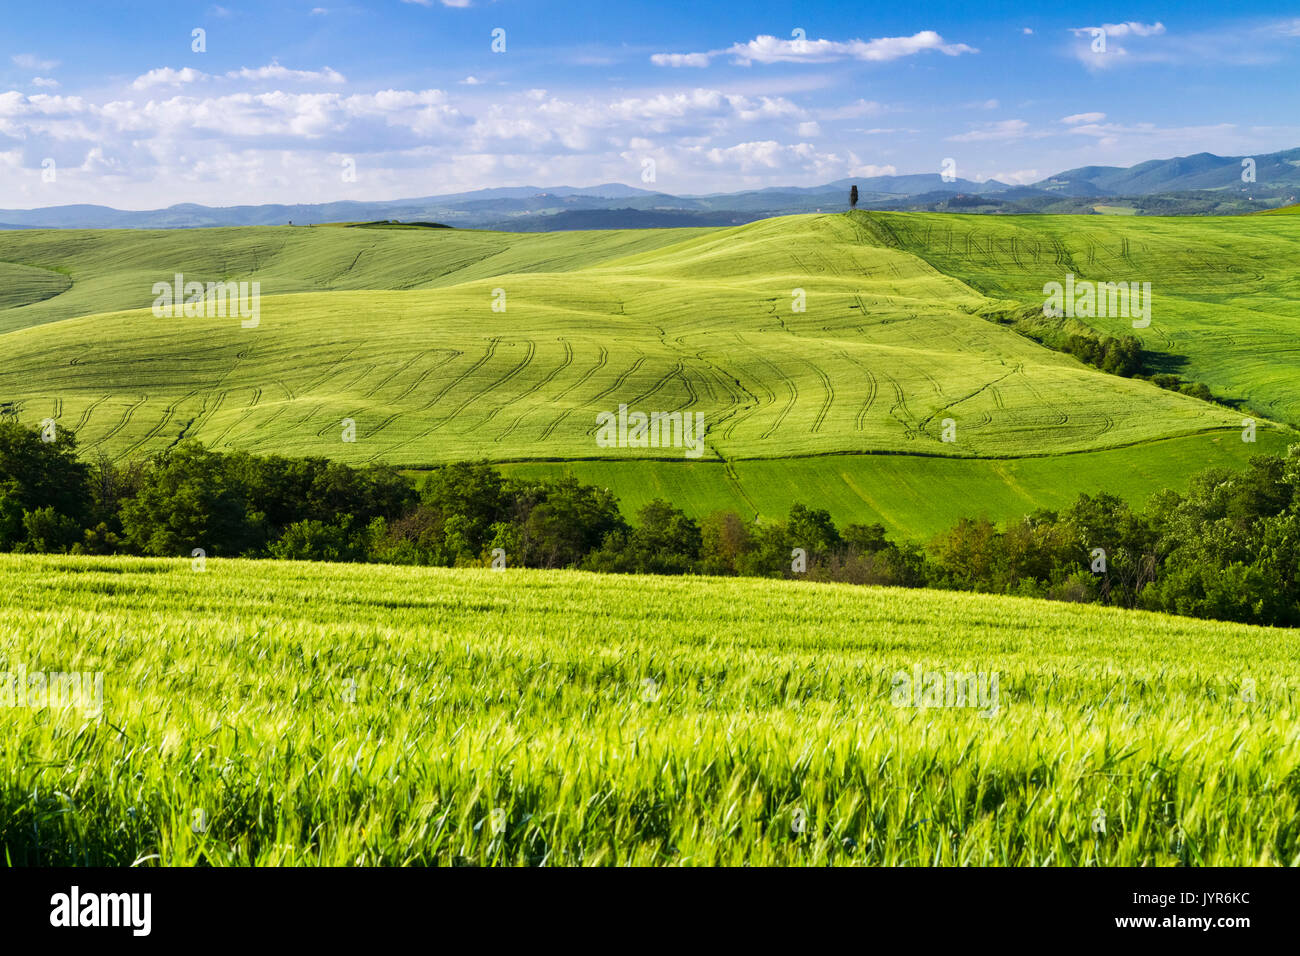 Green hills of wheat in the countryside near Asciano, Val d'Orcia, Tuscany, Italy. Stock Photo